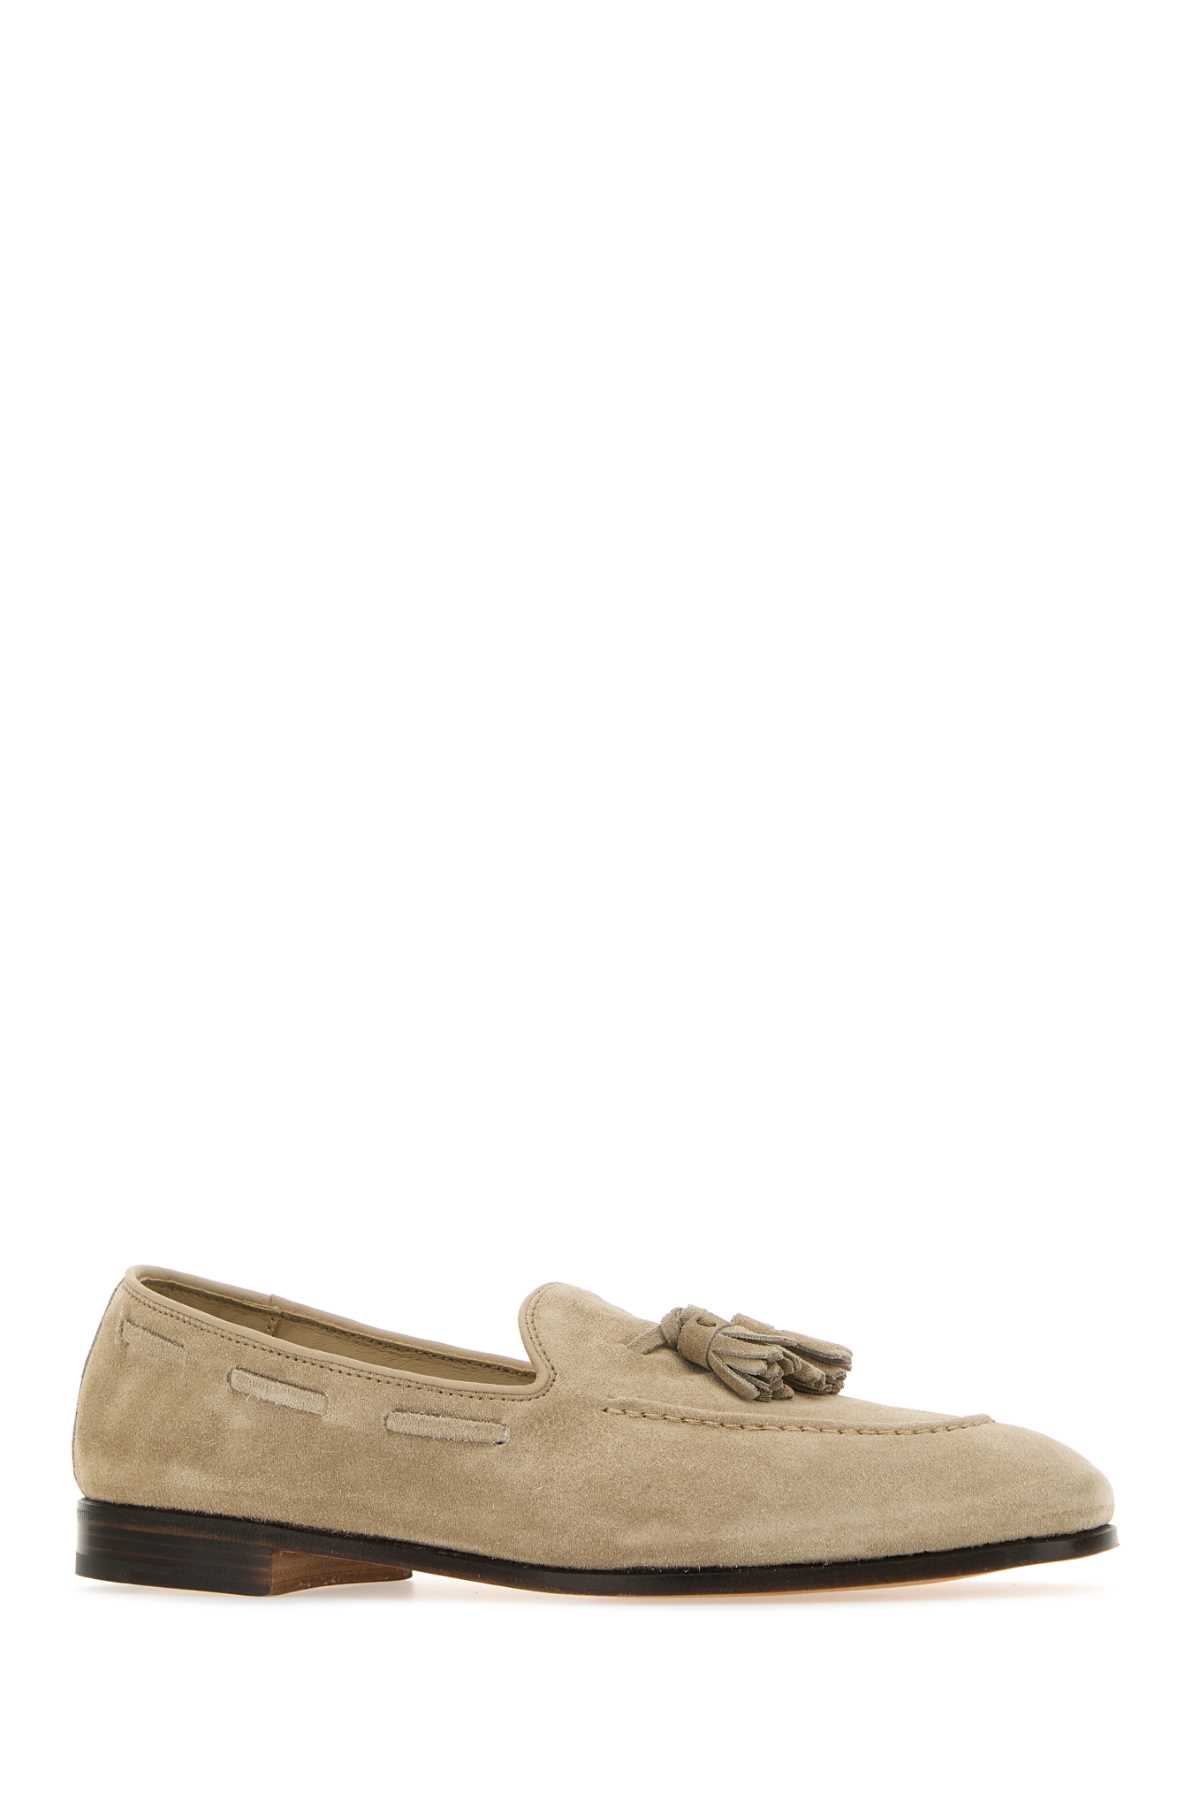 Church's Sand Suede Loafers In Desert